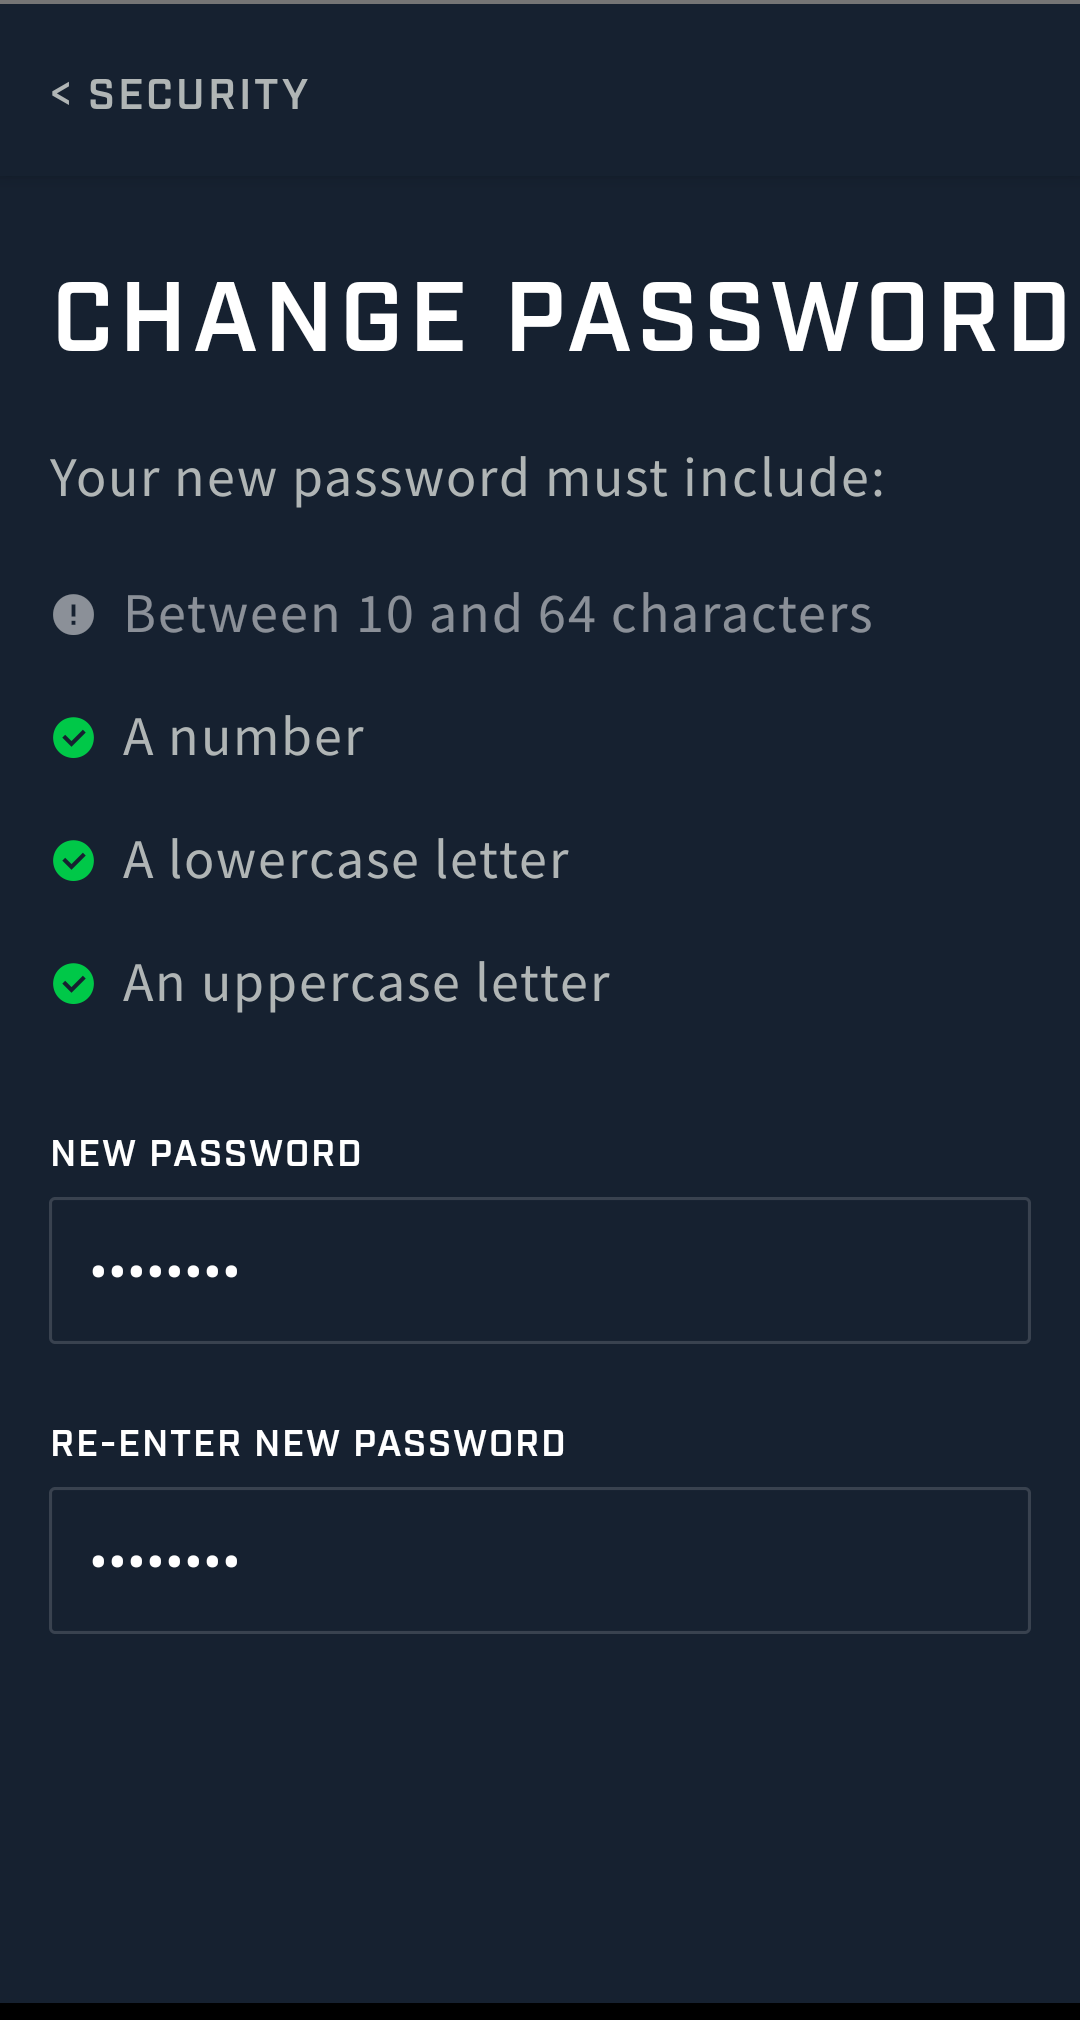 A screenshot from the Smartabase Athlete app showing an example of the password reset screen and password criteria